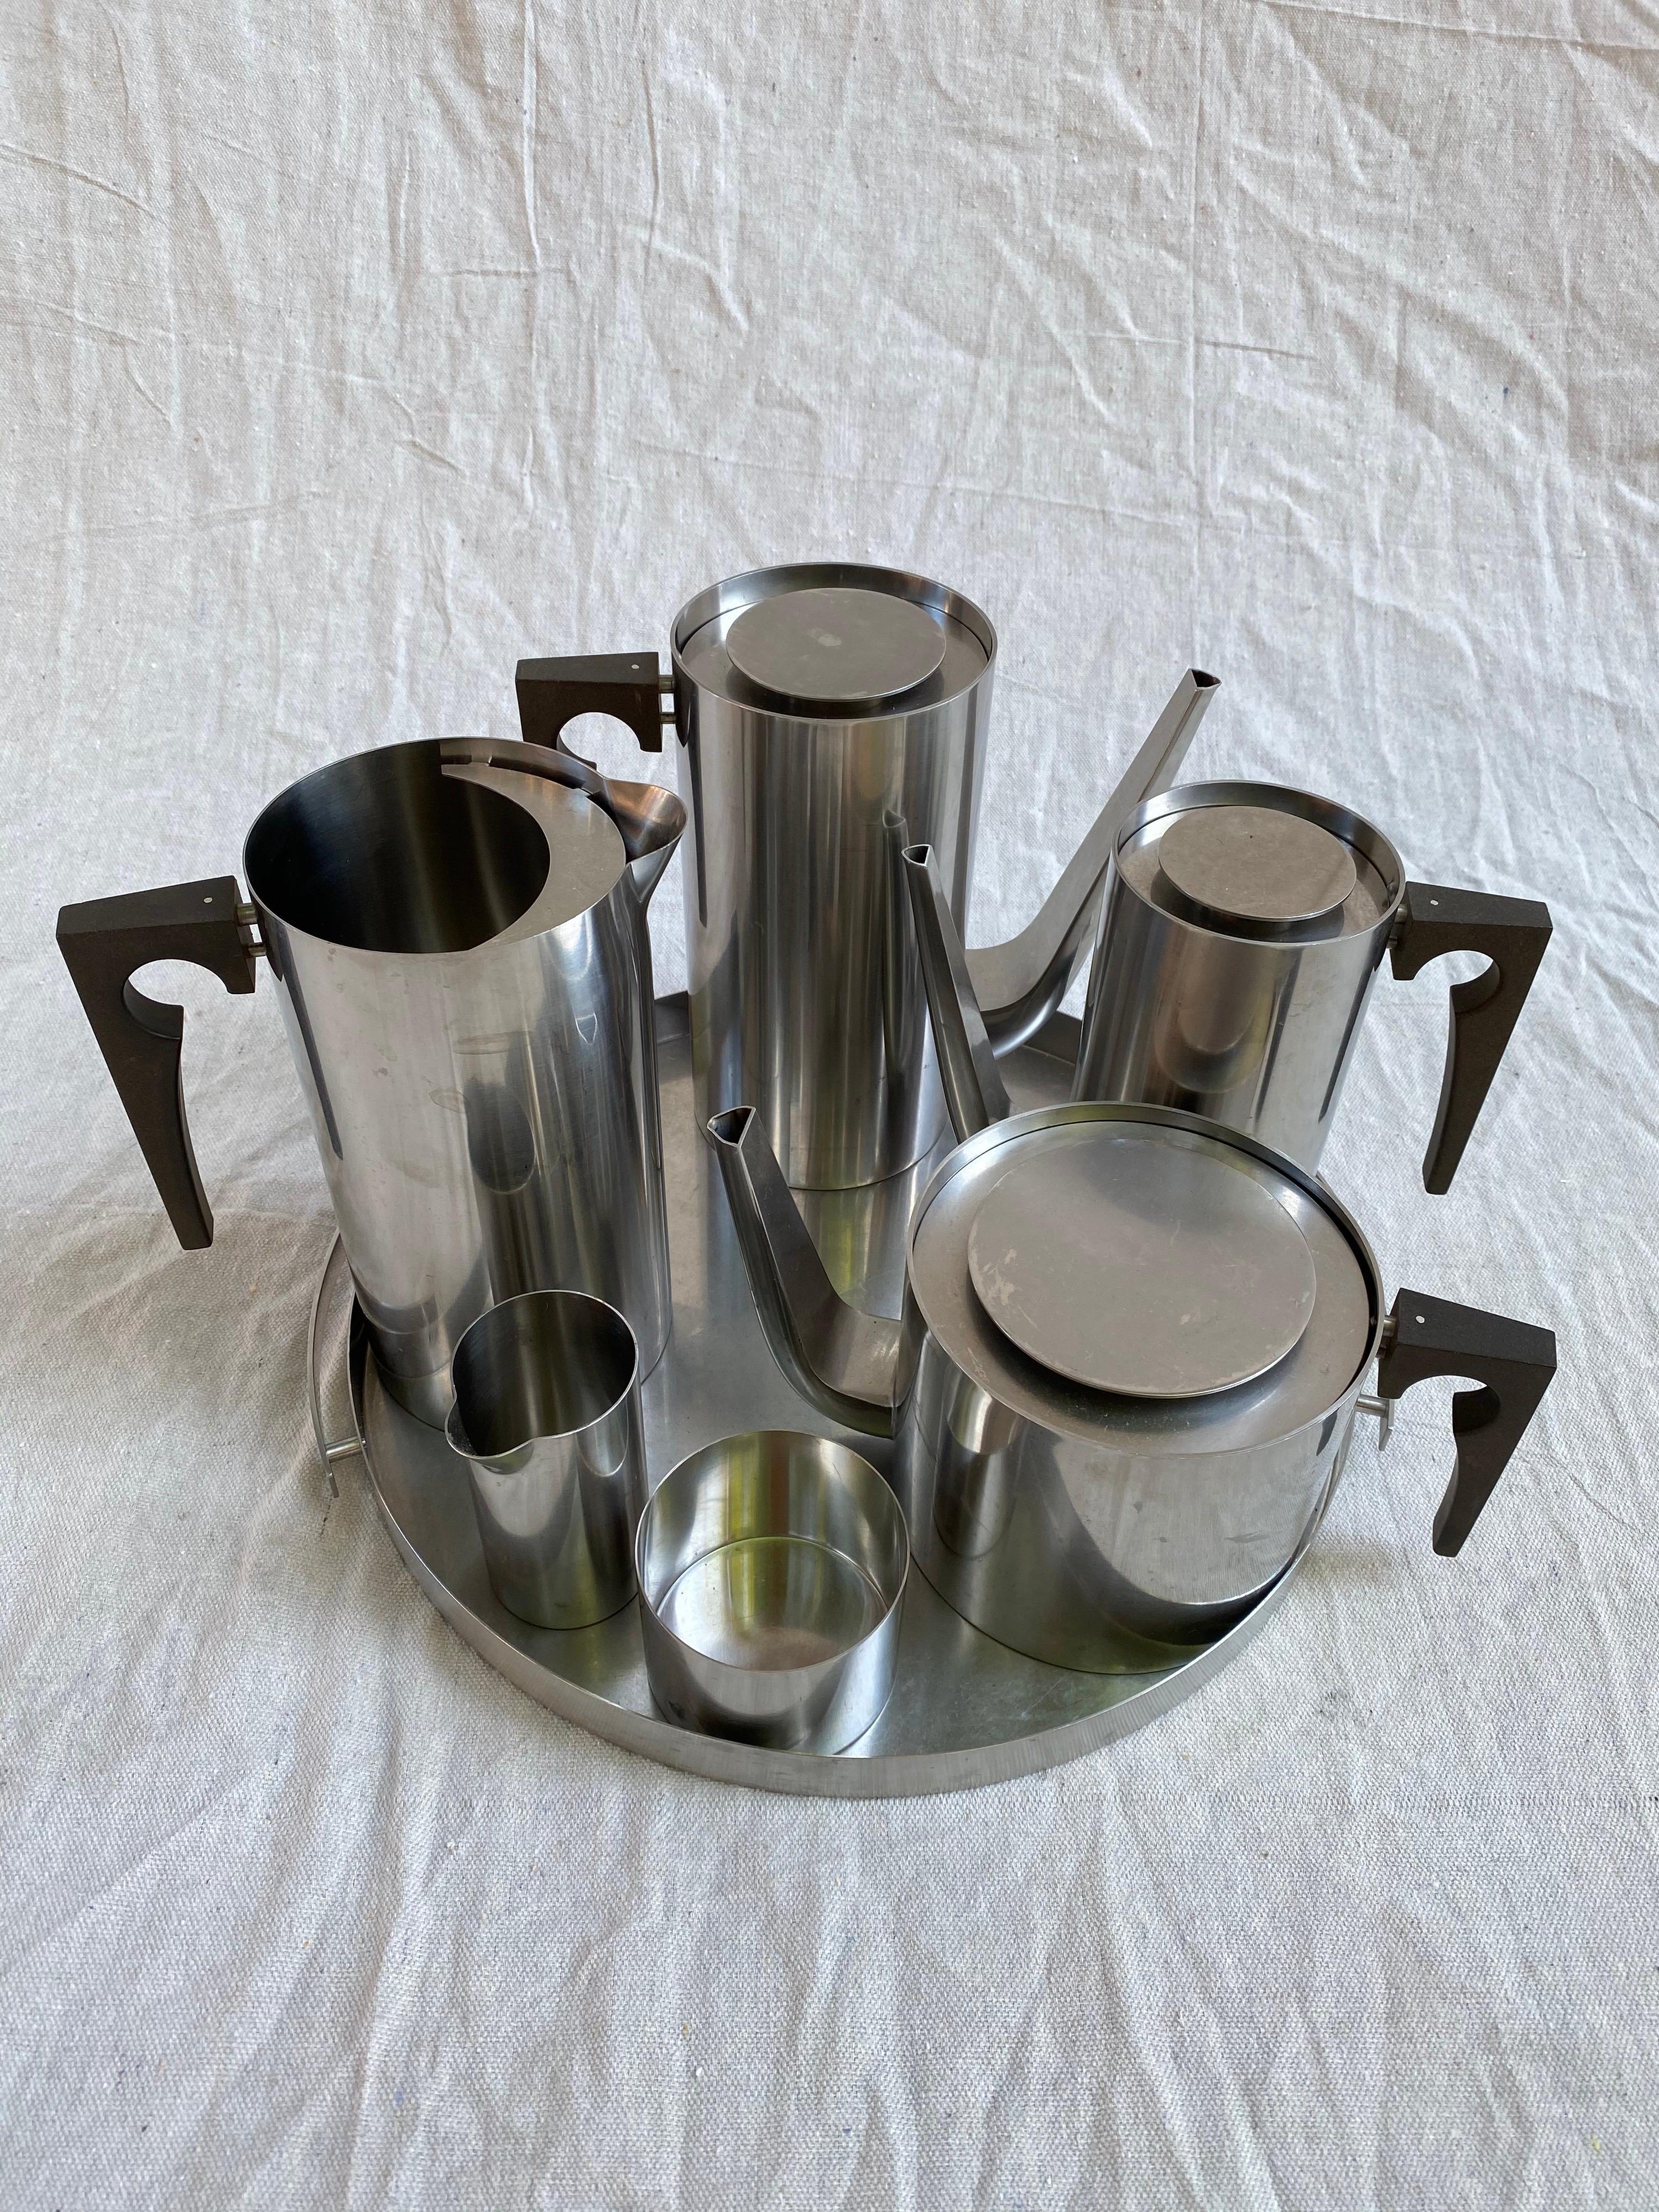 Arne Jacobsen for Stelton stainless steel coffee, tea, drink set. Includes coffee and tea pots, water pitcher, Espresso pot and cream and sugar that all fit on the round handled tray. Very nice condition, basically looks unused!